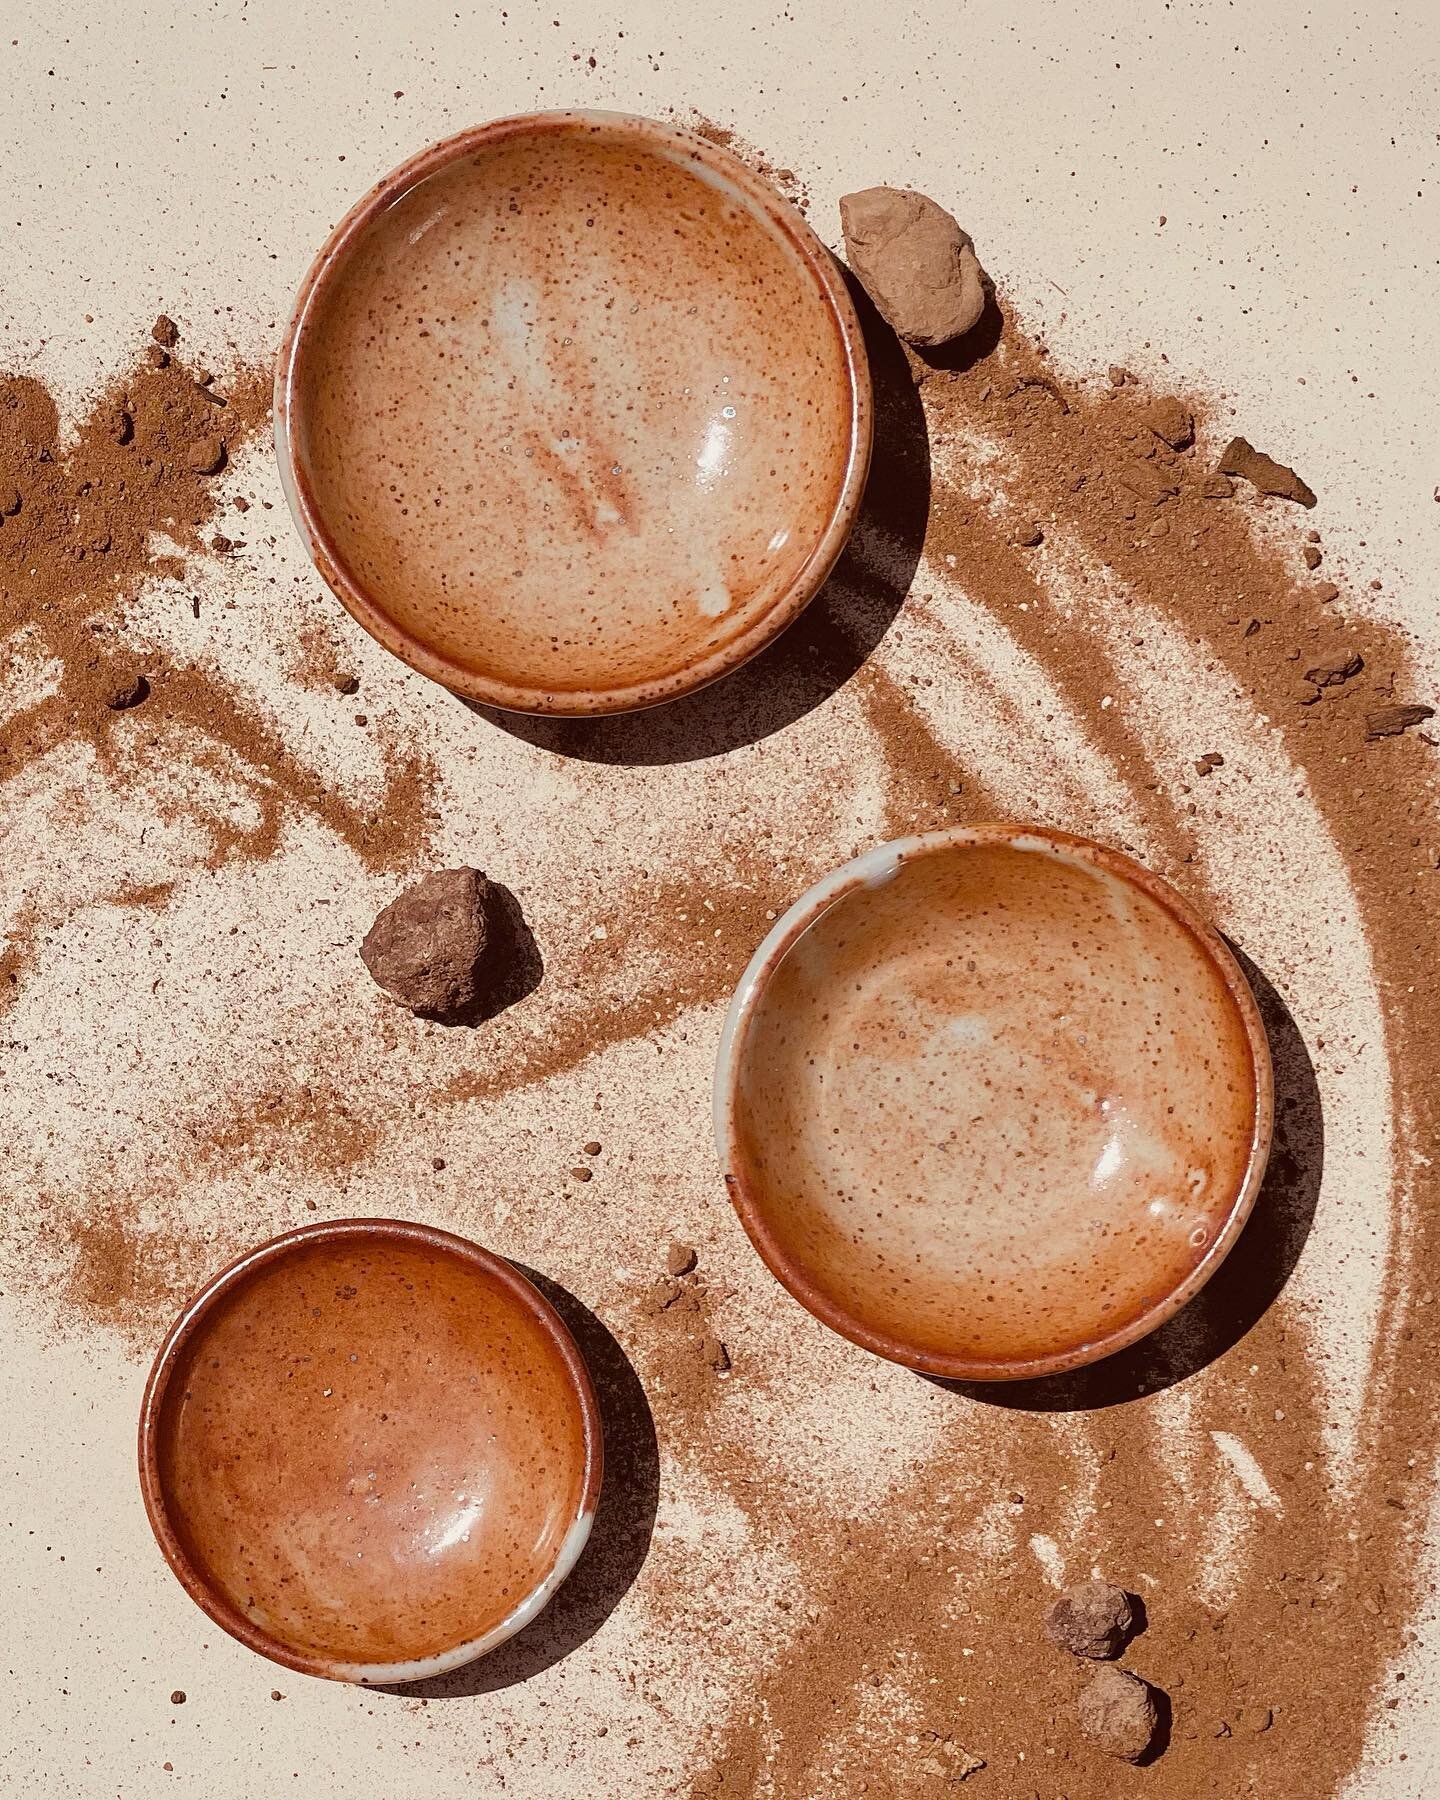 D E S E R T  P O T  D R O P 🌞  5/26 at 12pm EST

a summertime collection of hot pots, inspired by the desert. think WARM TONES. the red dirt, the grit, the sunsets, the heat, the simplicity of landscape, the textures... and a whole lotta dust. 

for